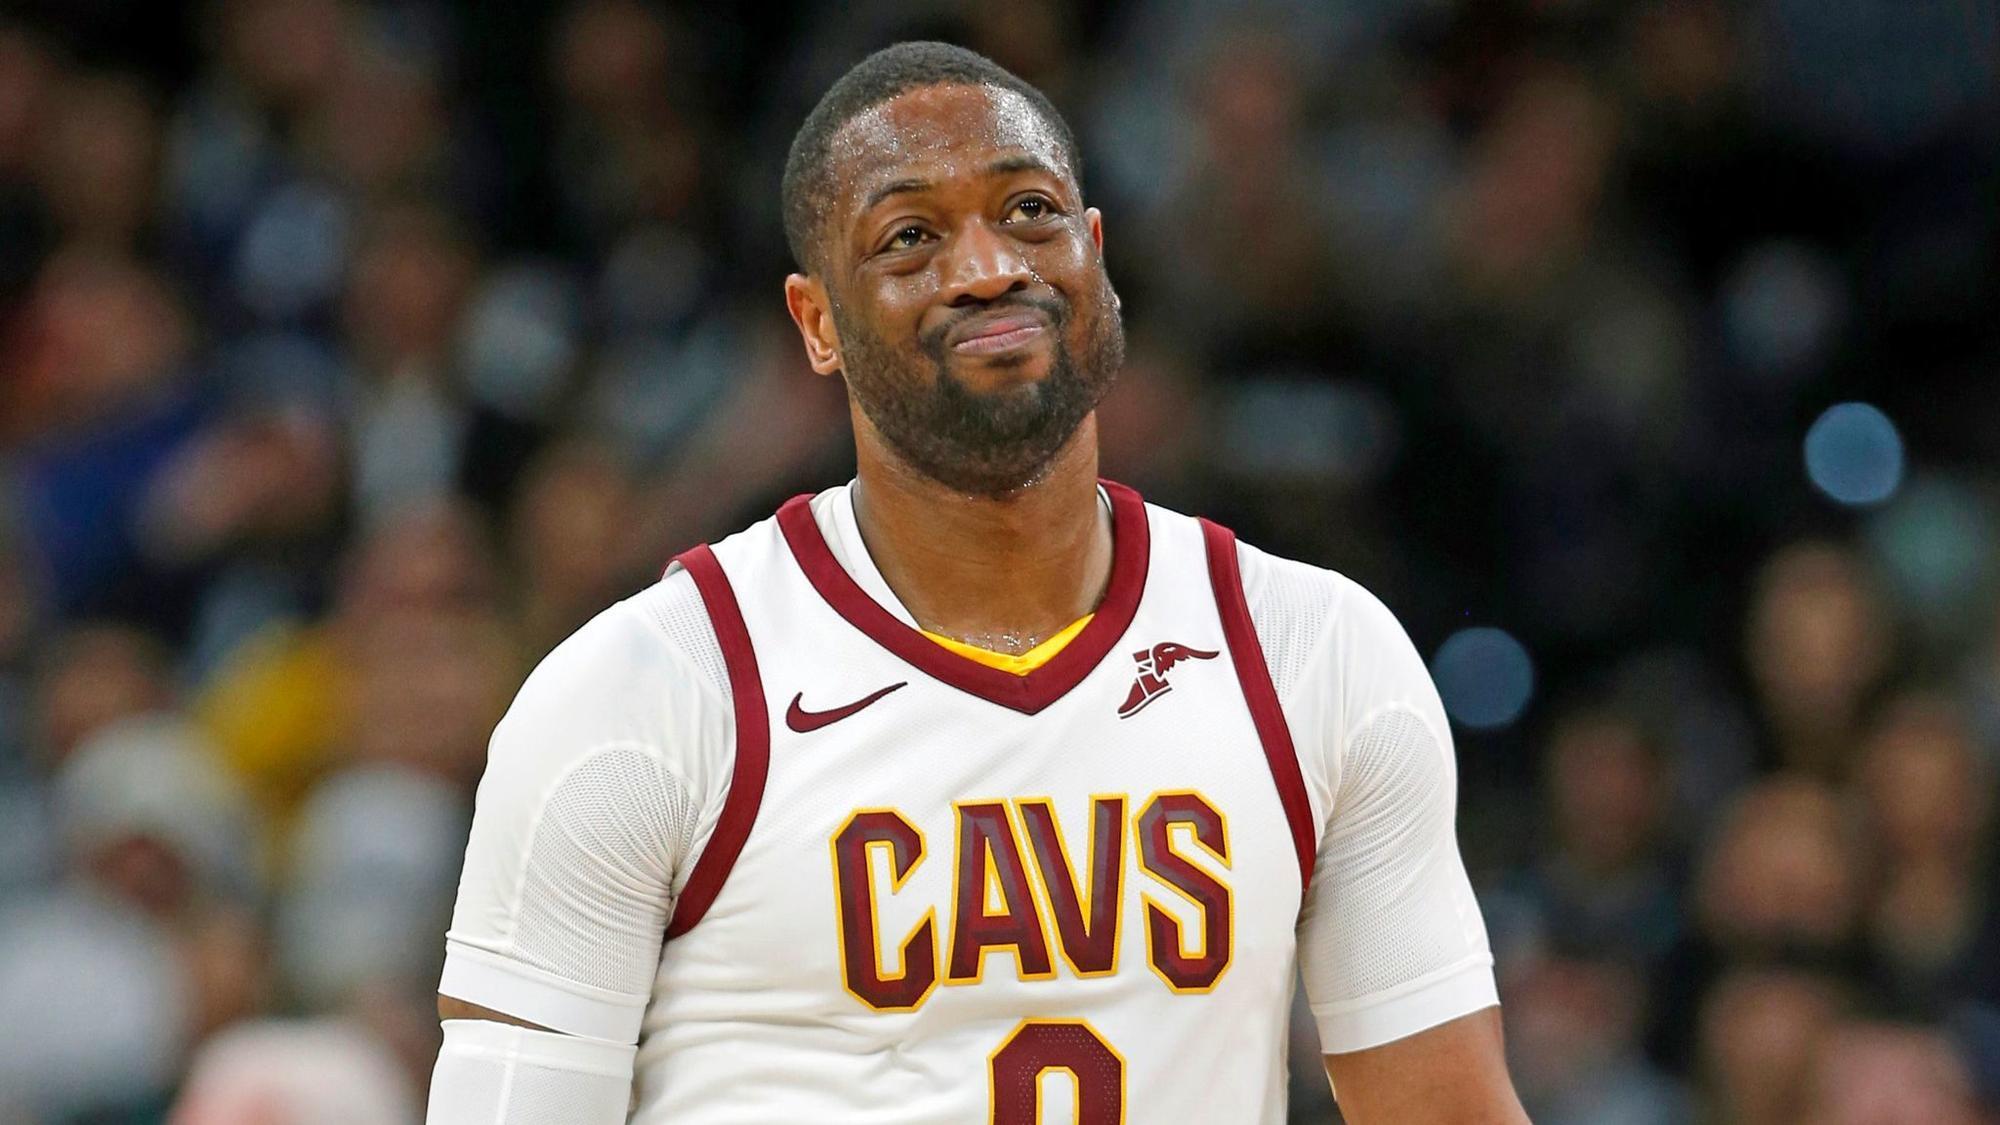 Cavs guard Dwyane Wade leaves team for 'personal matter'